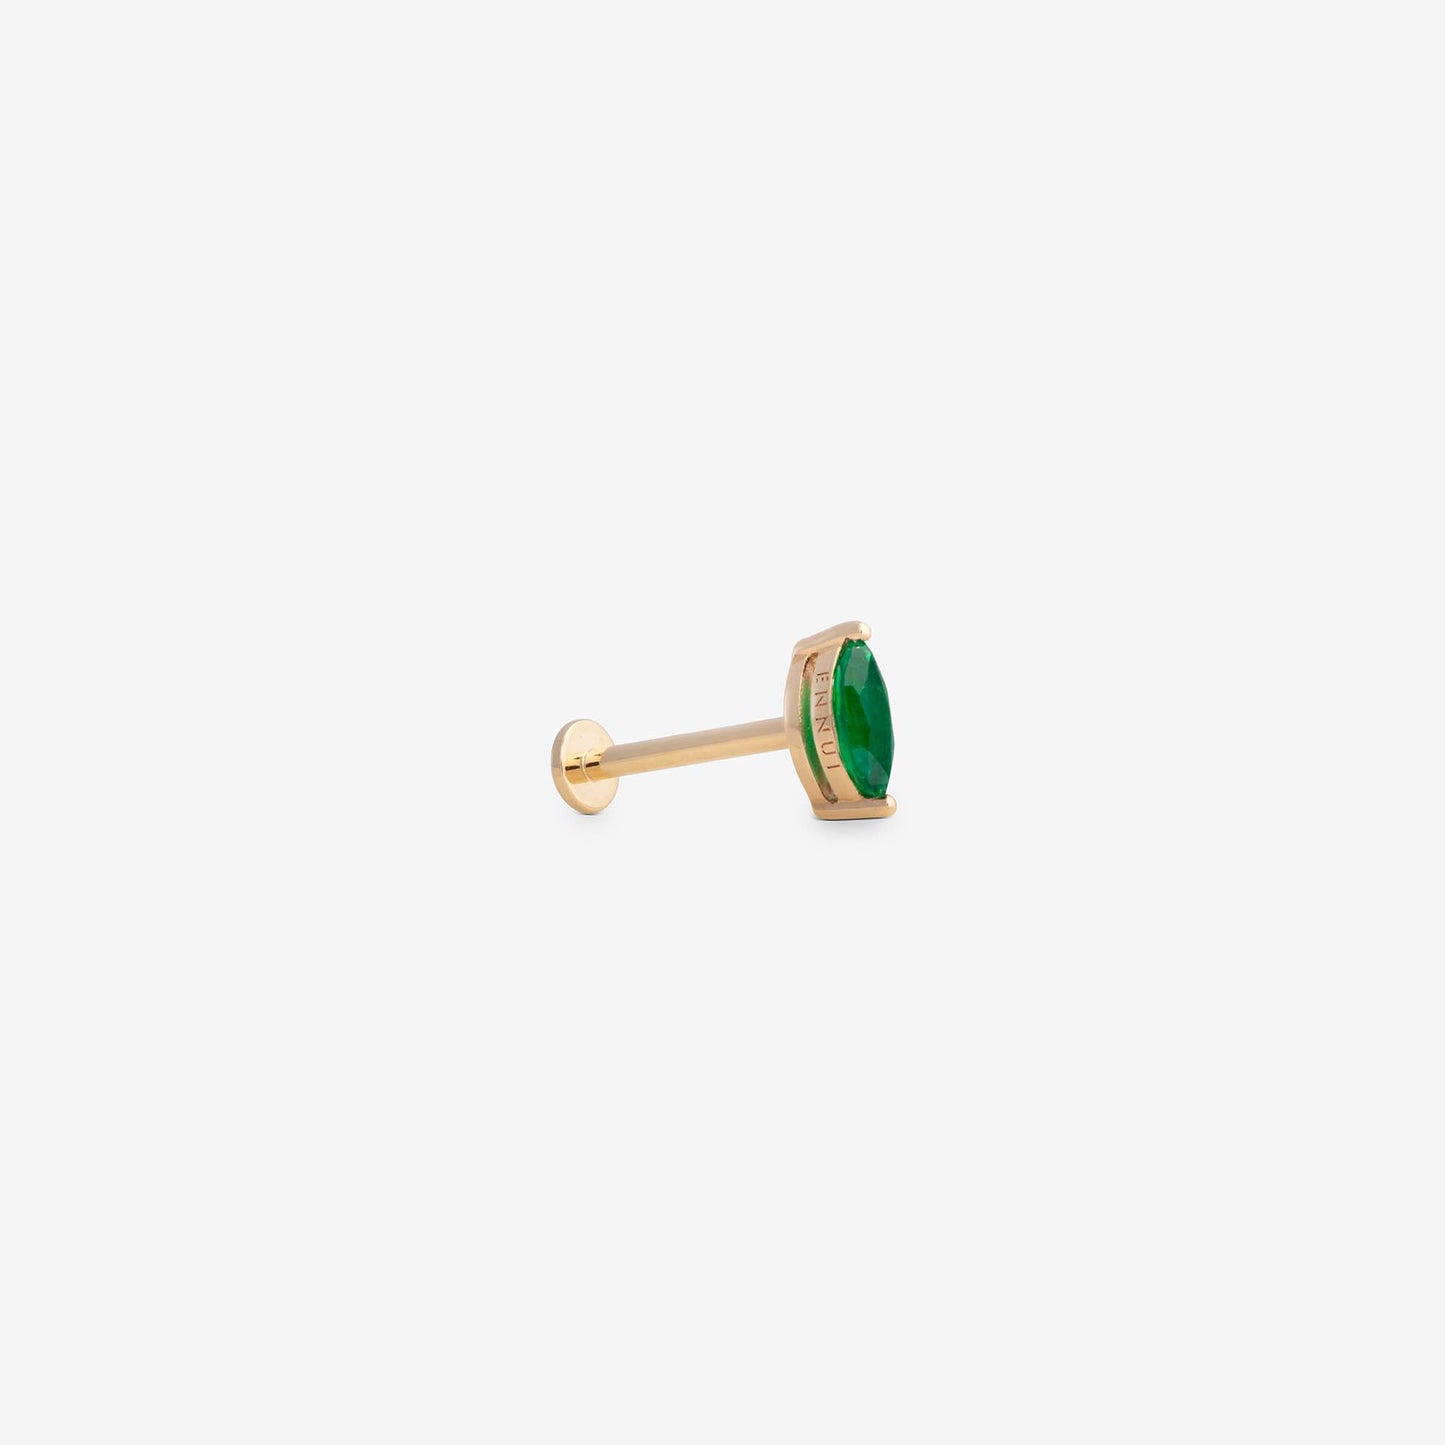 awareness labret emerald yellow gold from ennui atelier